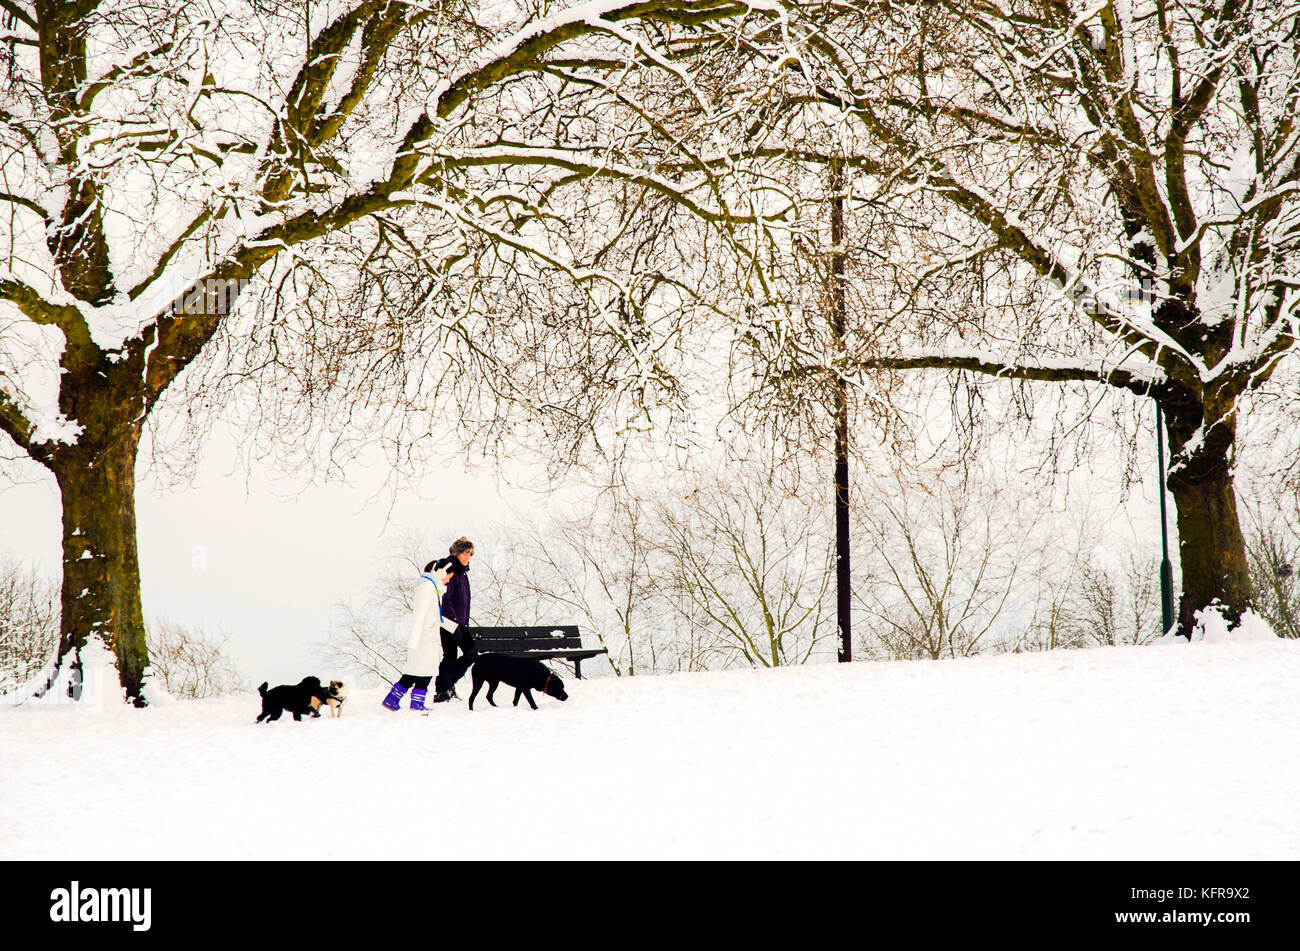 Snowy scene at Hilly Fields Park - London, England Stock Photo